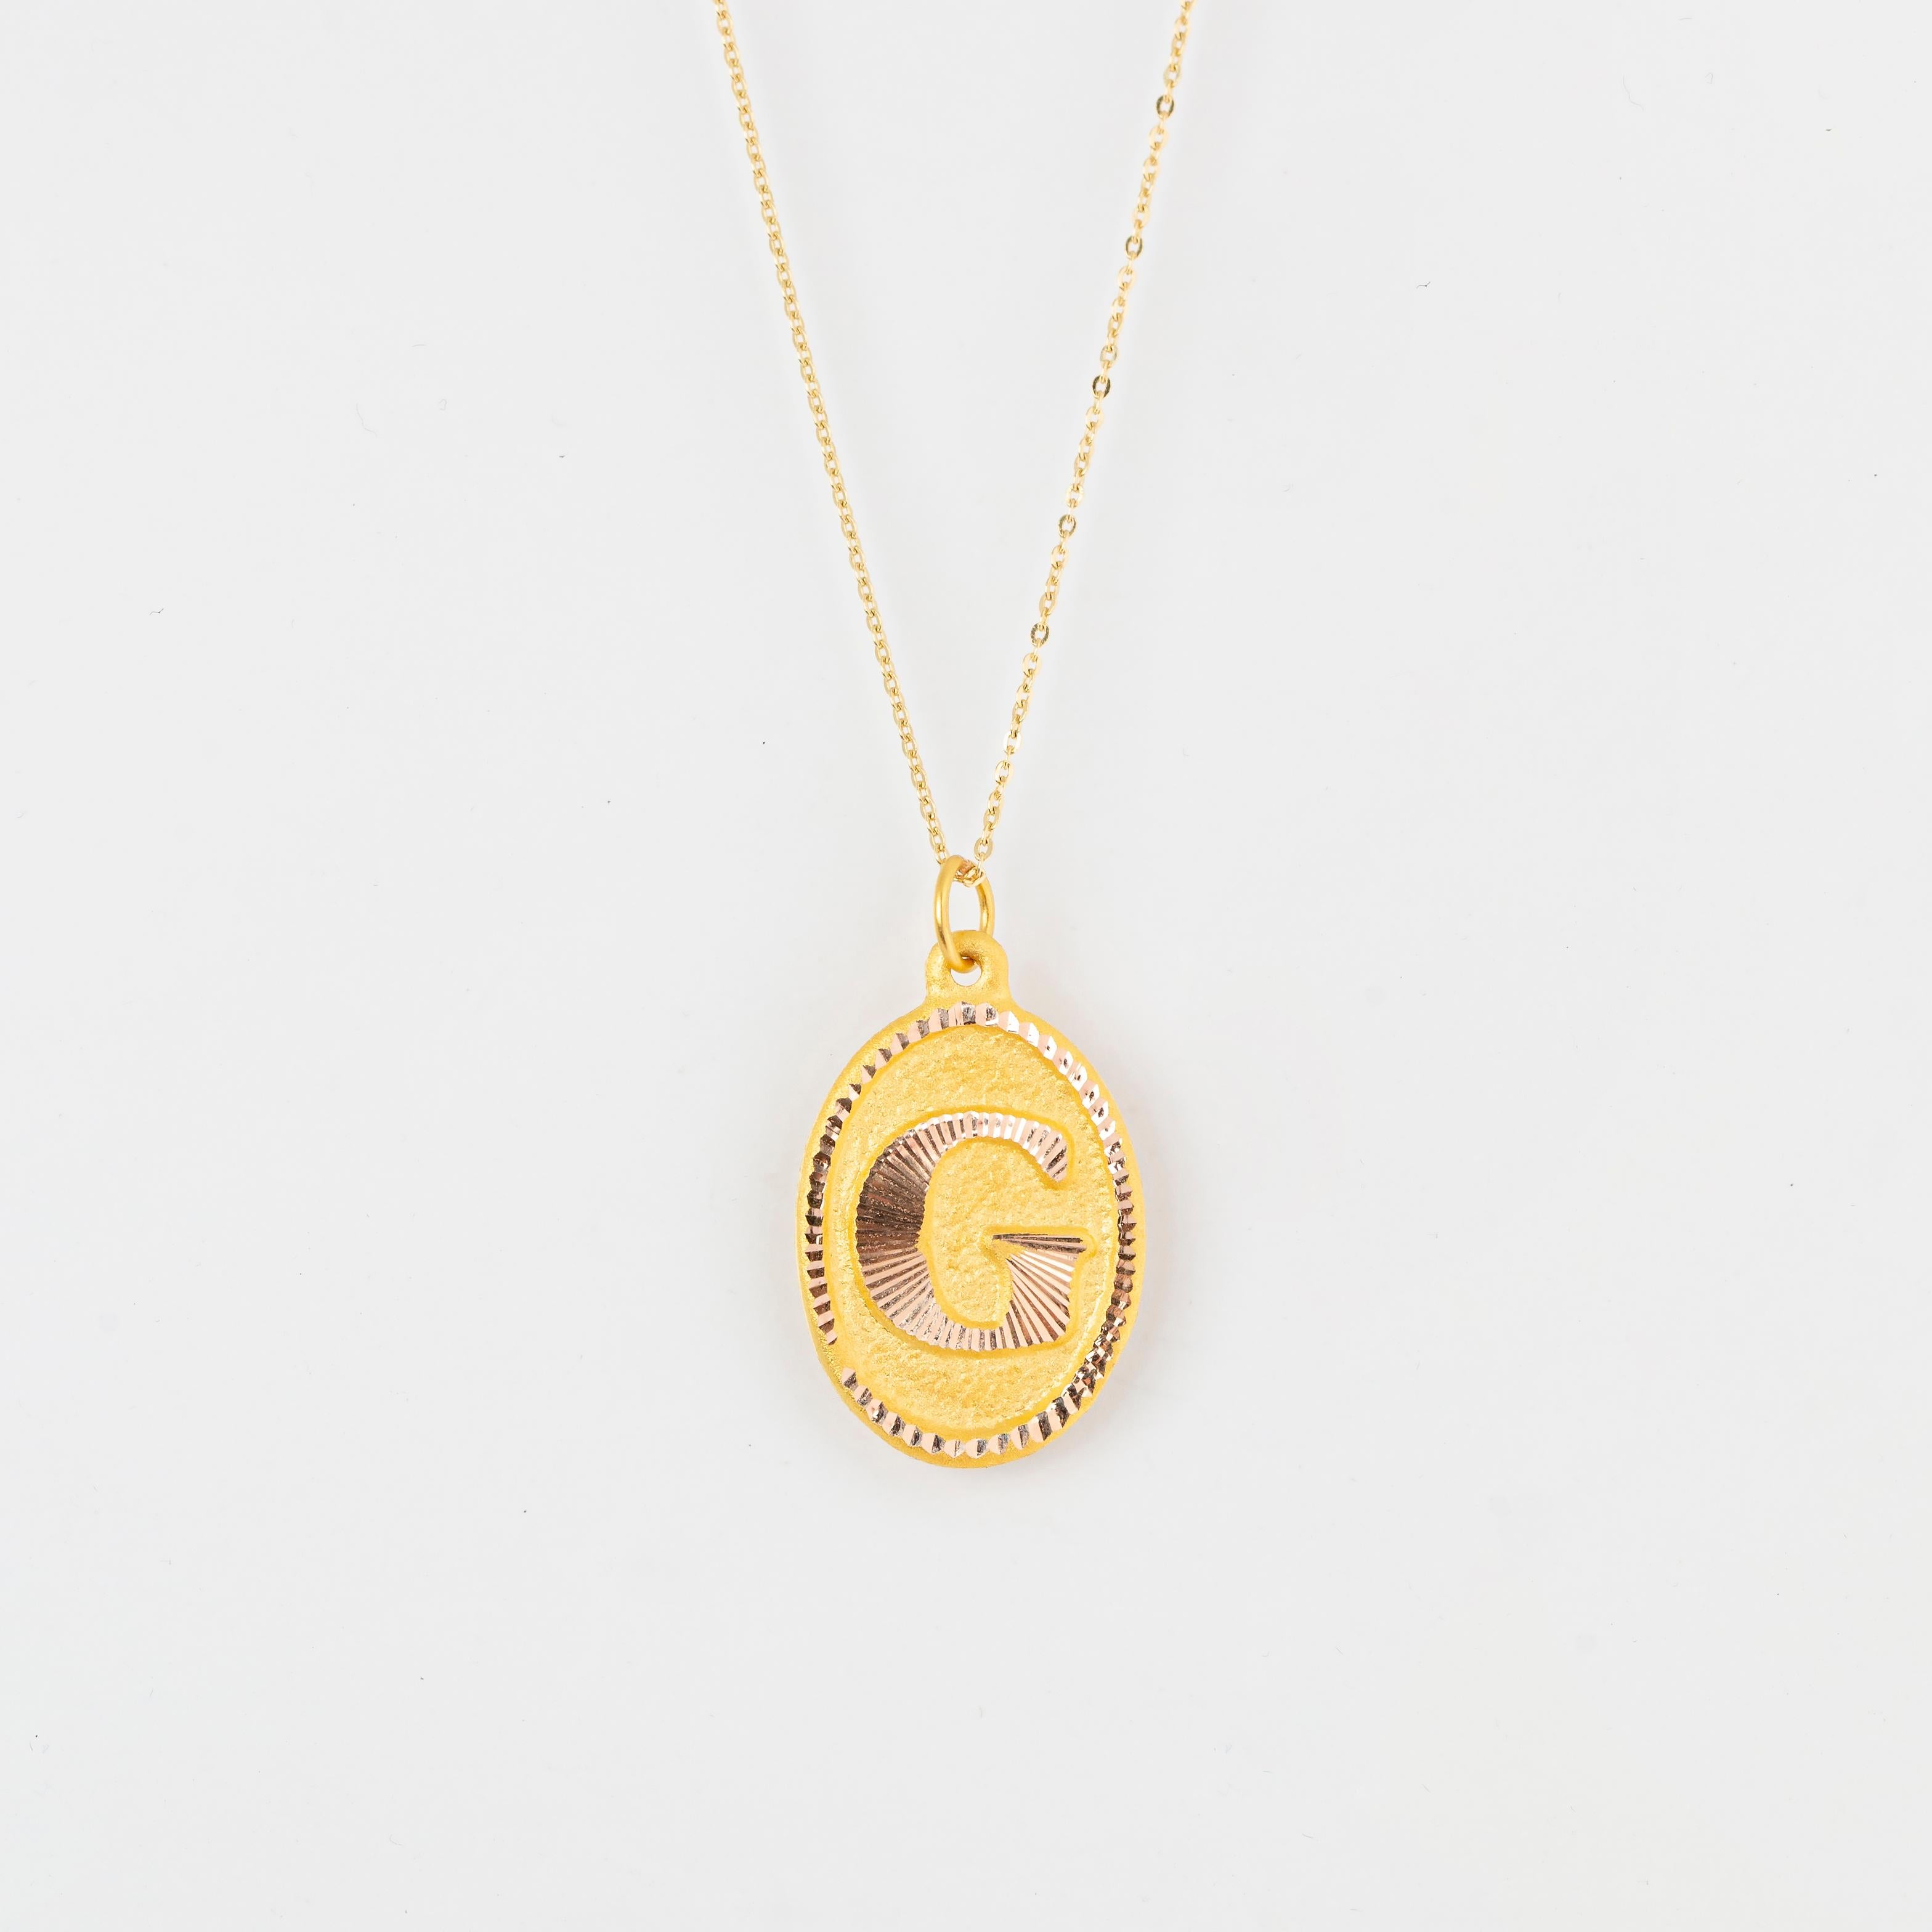 14K Gold Necklaces, Letter Necklace Models, Letter G Gold Necklace-Gift Necklace Models, Daily Necklaces, Letter Jewelry

It's a manual labor product. 'Handmade'. Fashionable product.

This necklace was made with quality materials and excellent